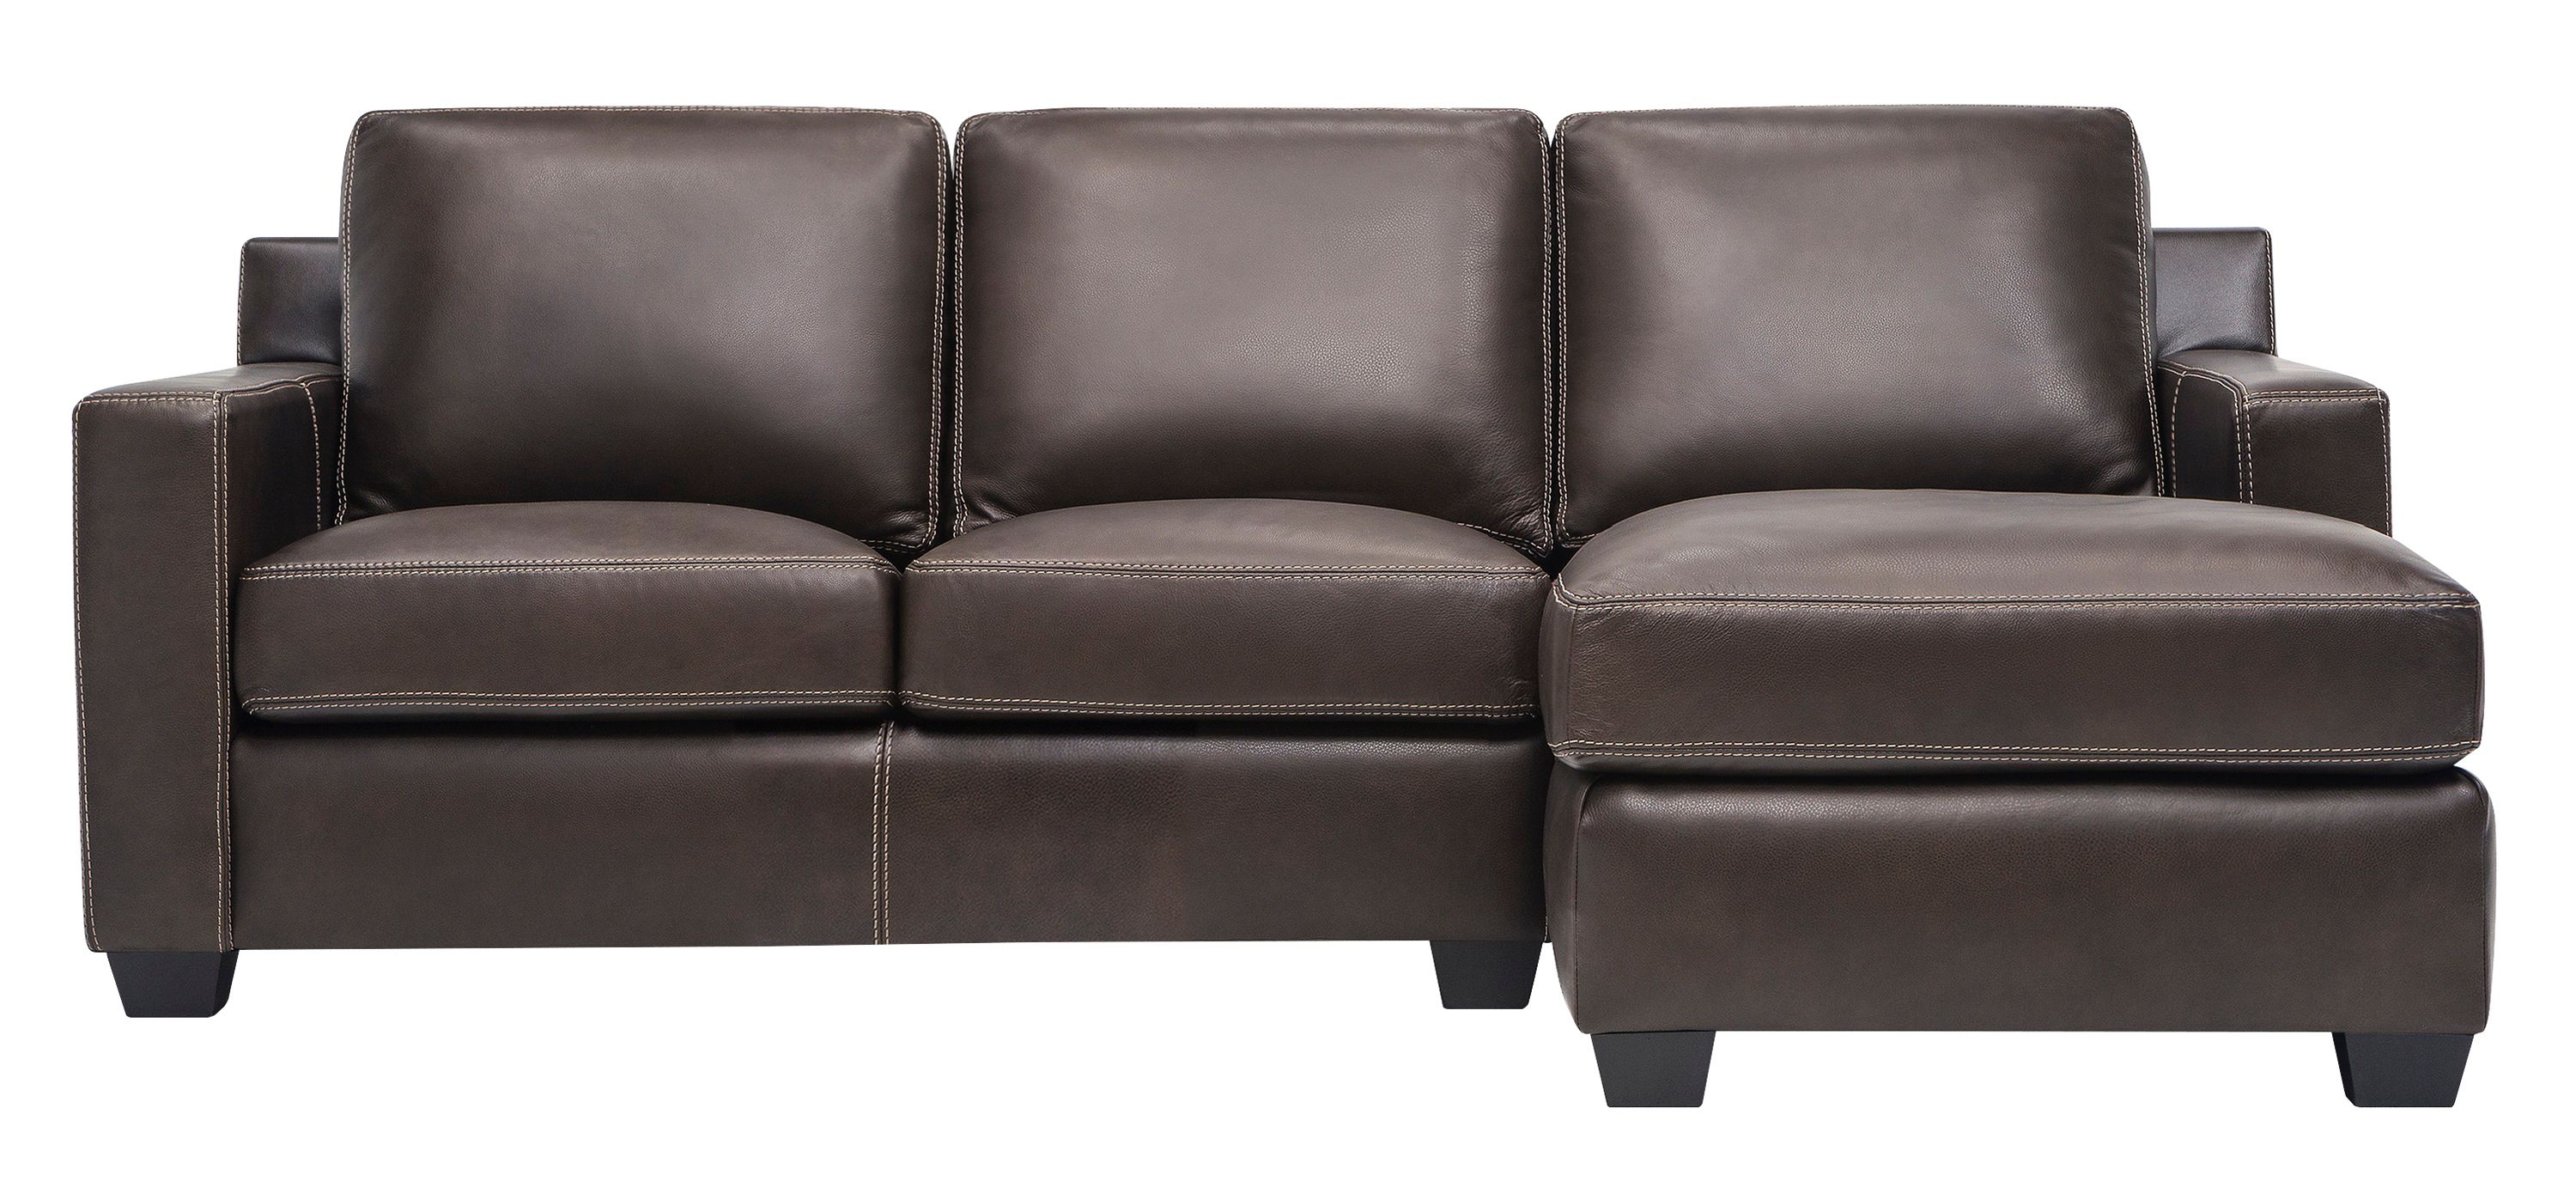 Anaheim Leather 2-pc. Sectional